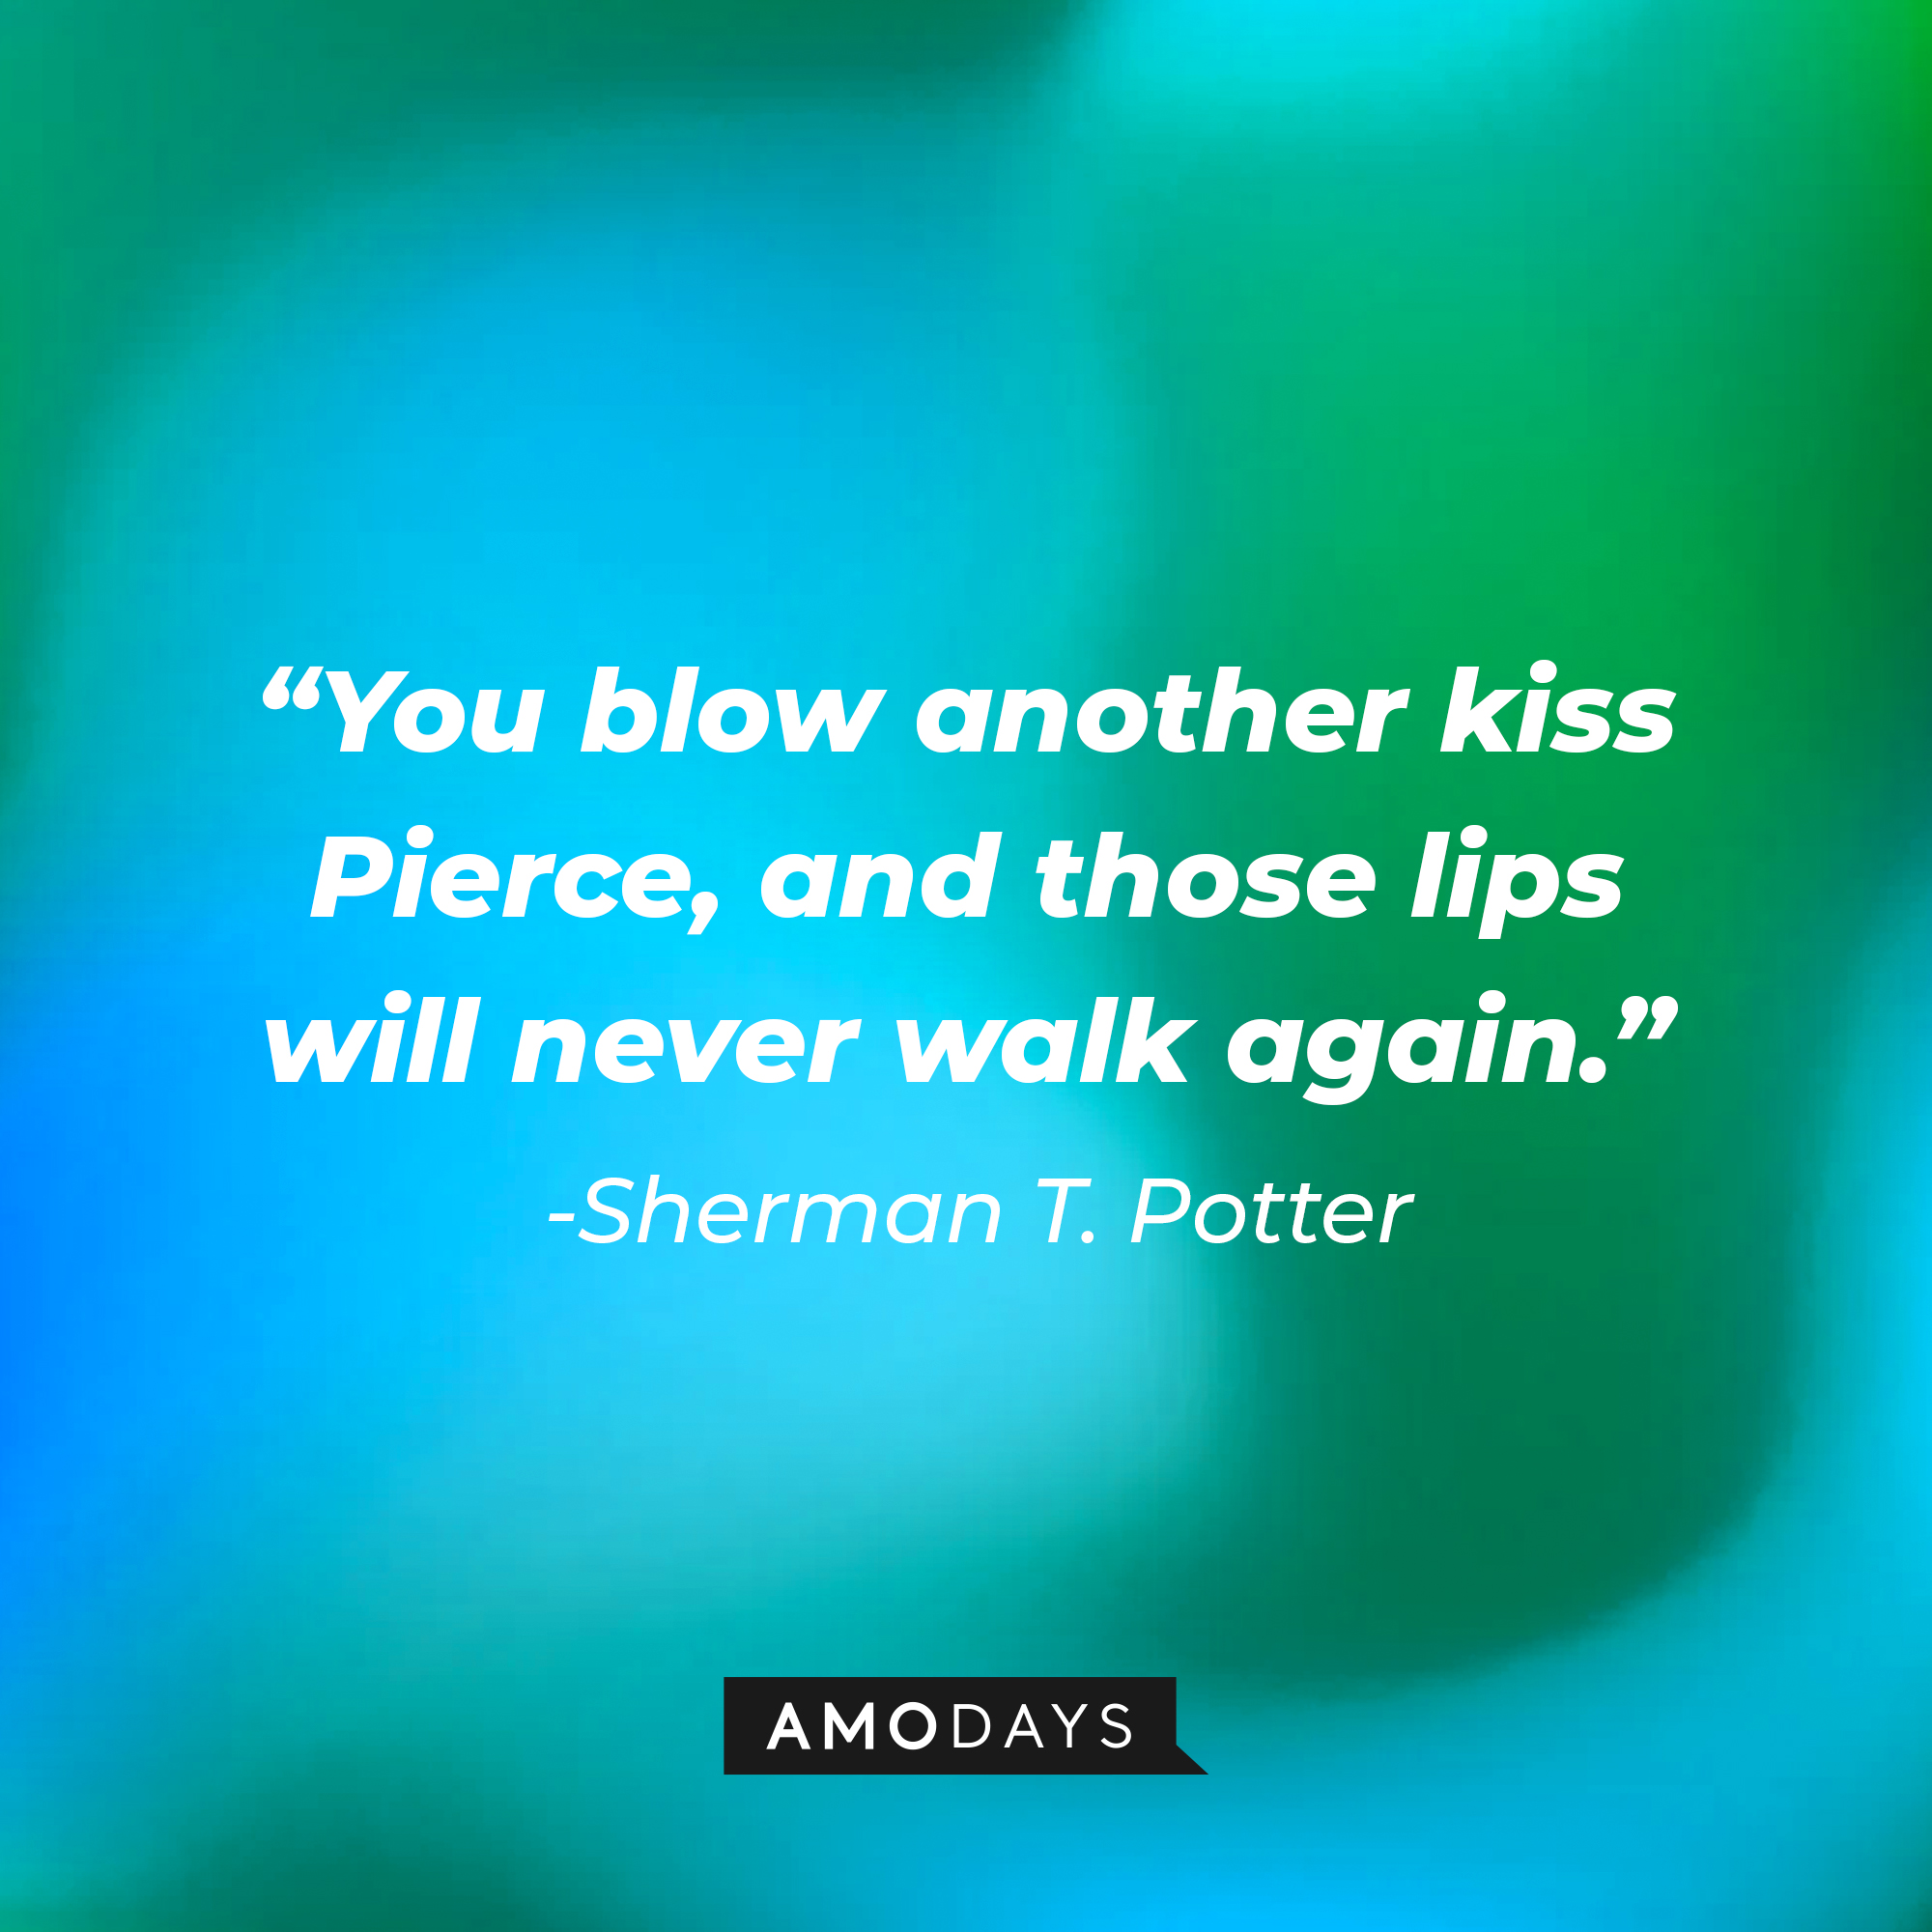 Sherman T. Potter’s quote: “You blow another kiss, Pierce and those lips will never walk again.” | Source: AmoDays